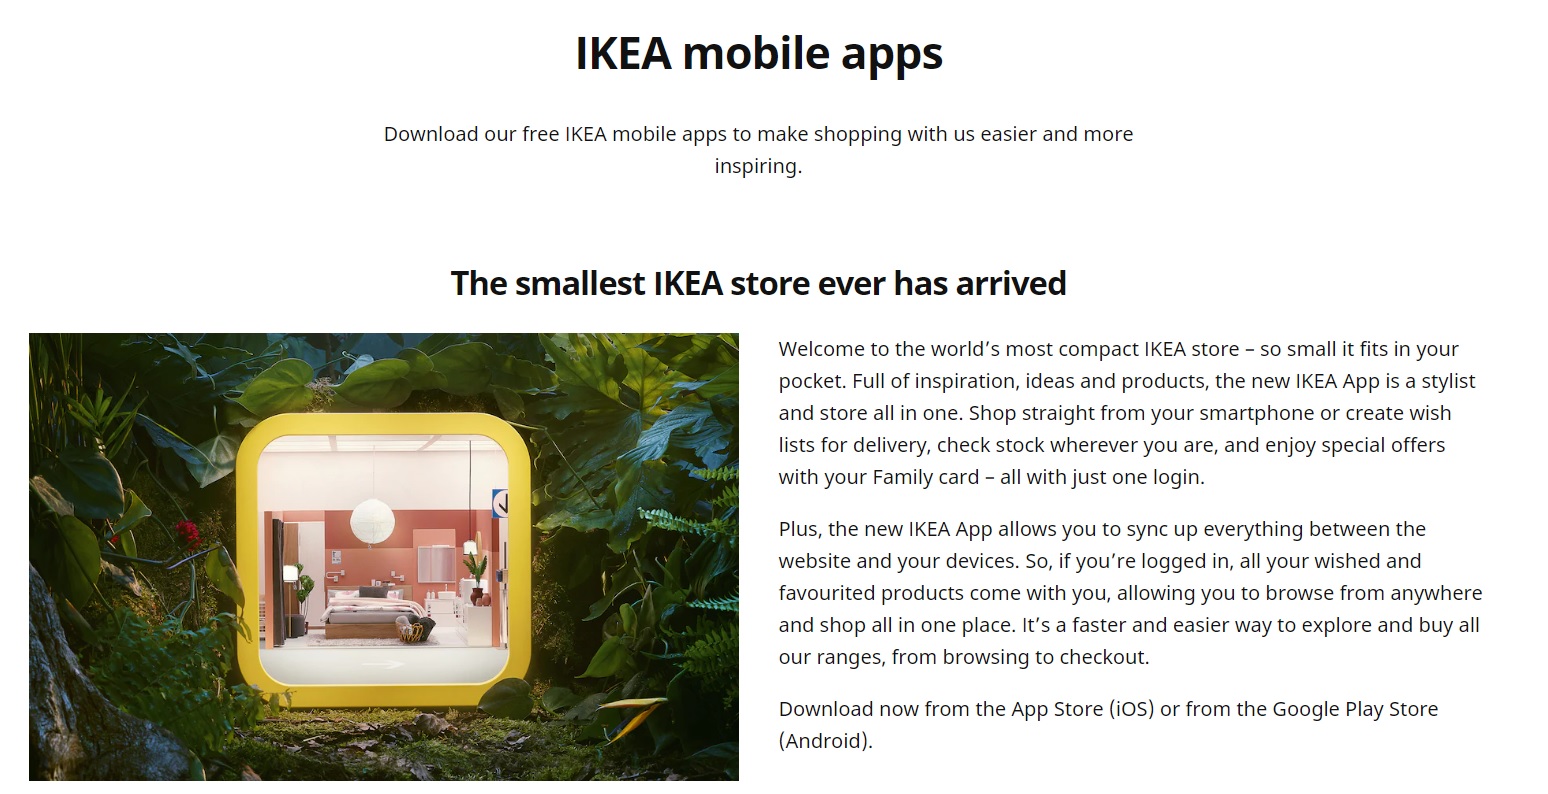 ikea-mobile-apps-case-study